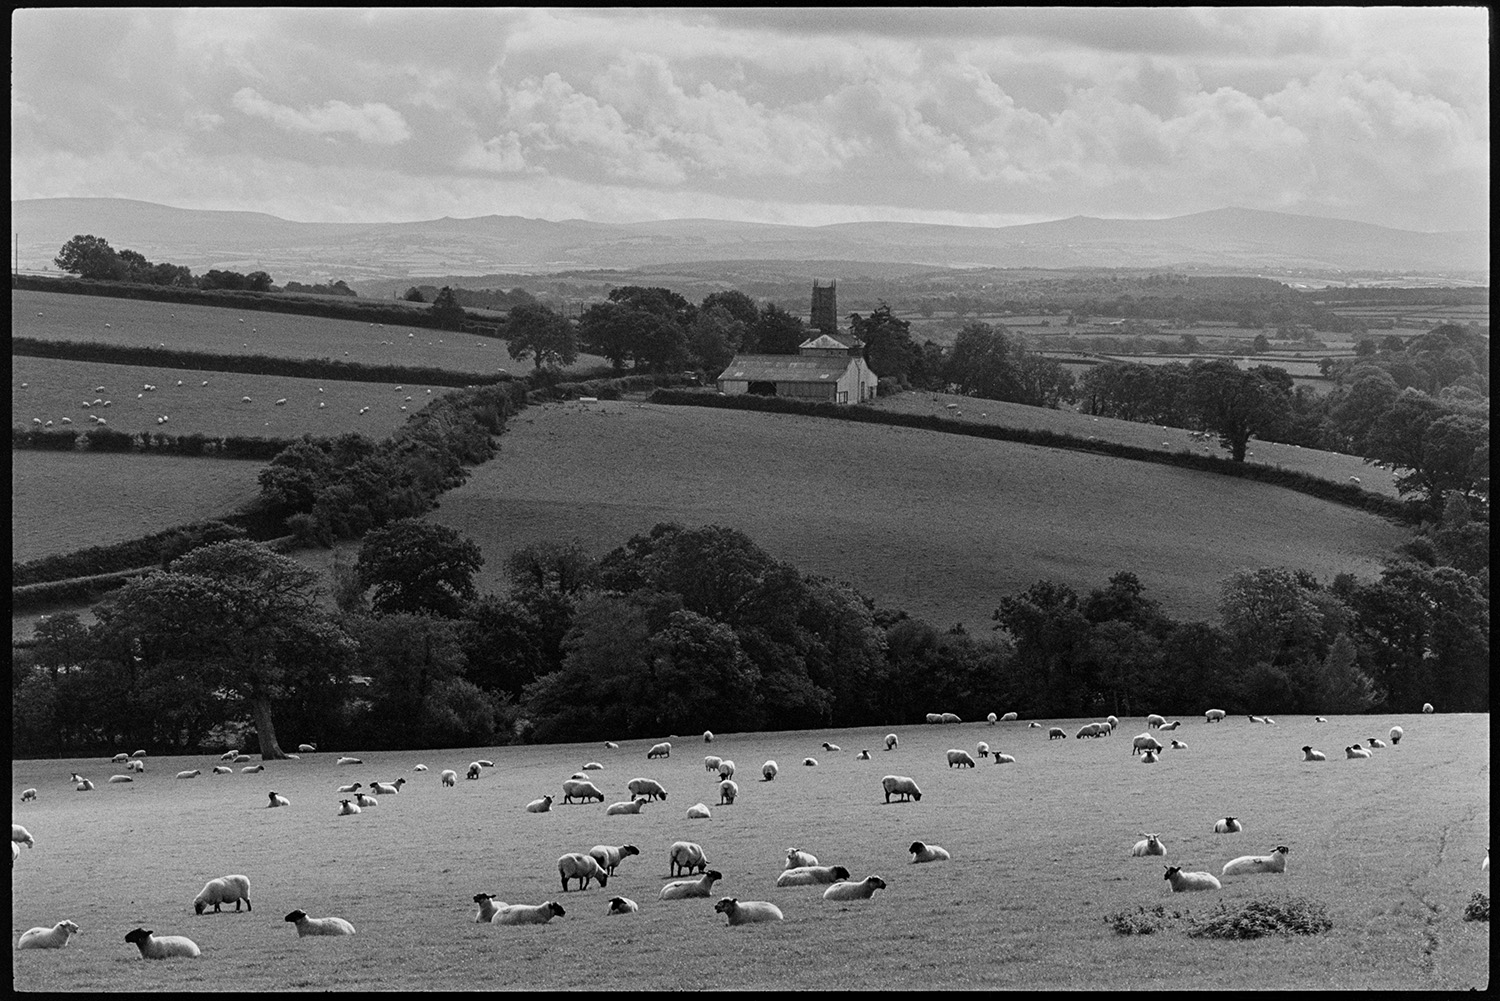 Landscape with sheep and distant moor. 
[Sheep grazing in a field at Berry Cross, Iddesleigh. A landscape with fields, hedgerows, tree and farm buildings can be seen in the background. Iddesleigh Church tower is also visible and Dartmoor is on the horizon.]